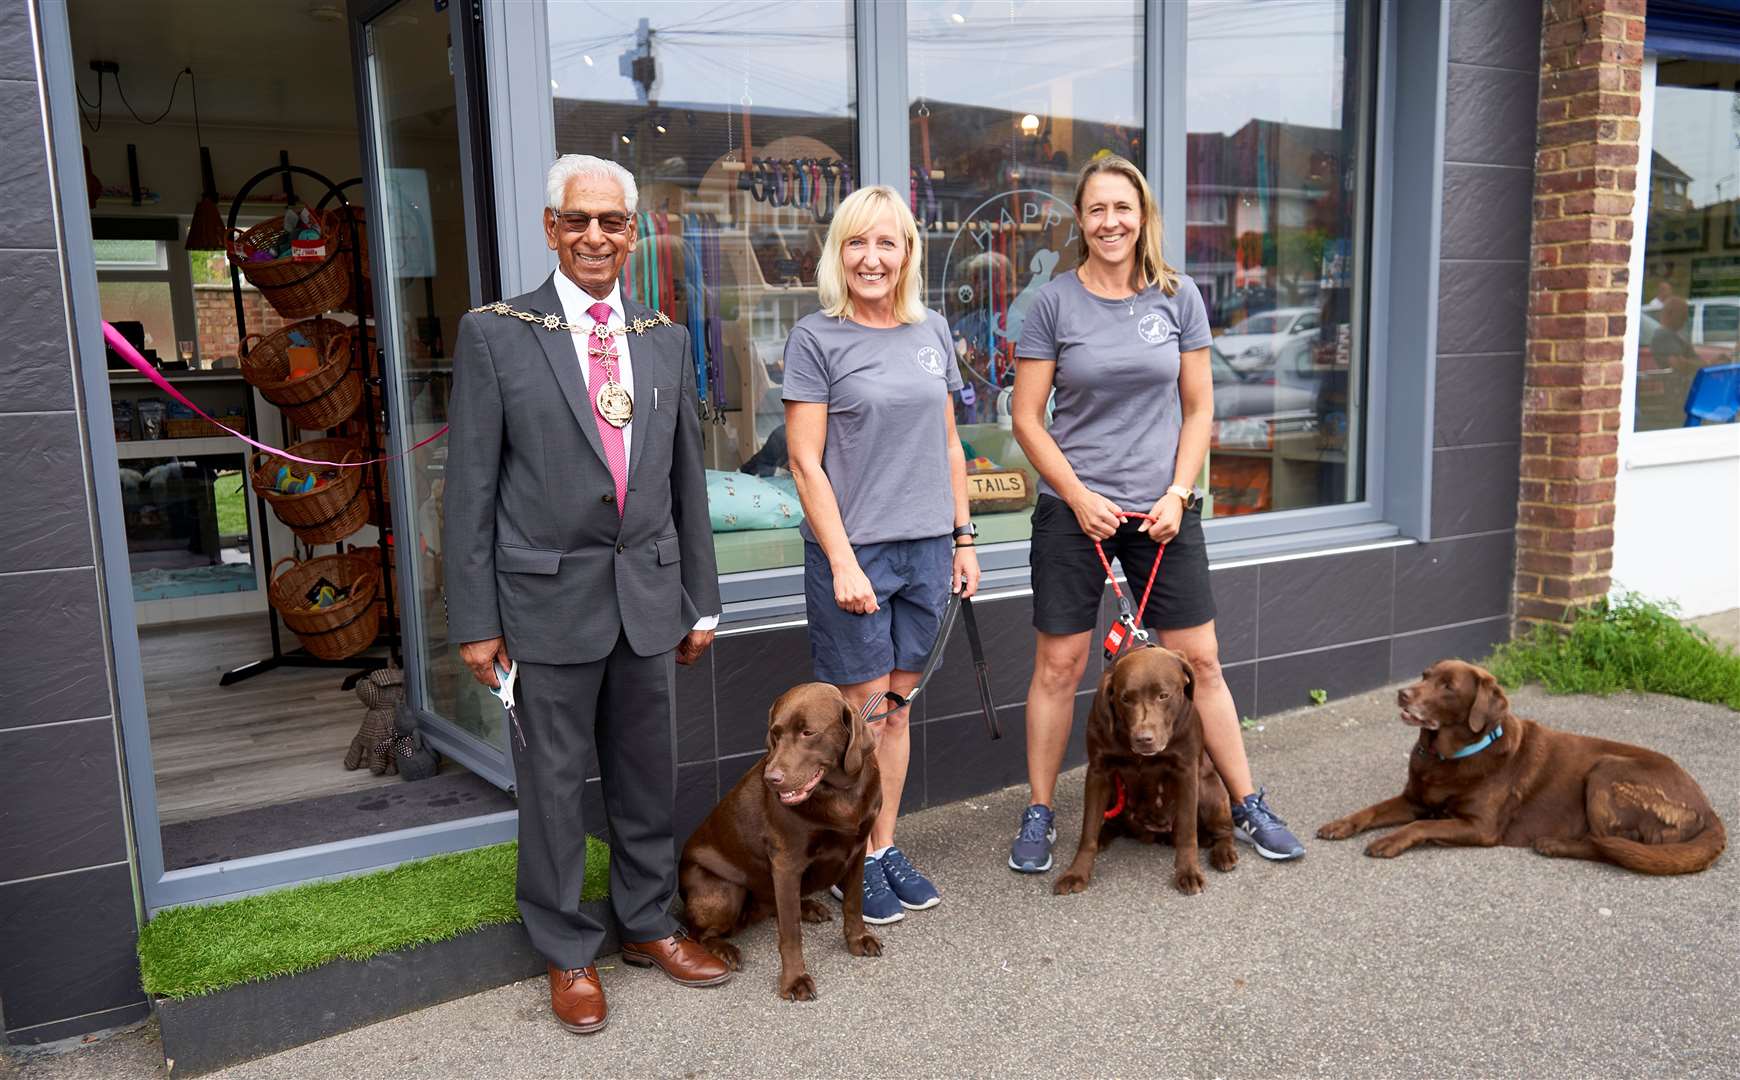 Joyful Tails pet retailer and canine groomers opens in Faculty Lane, Higham